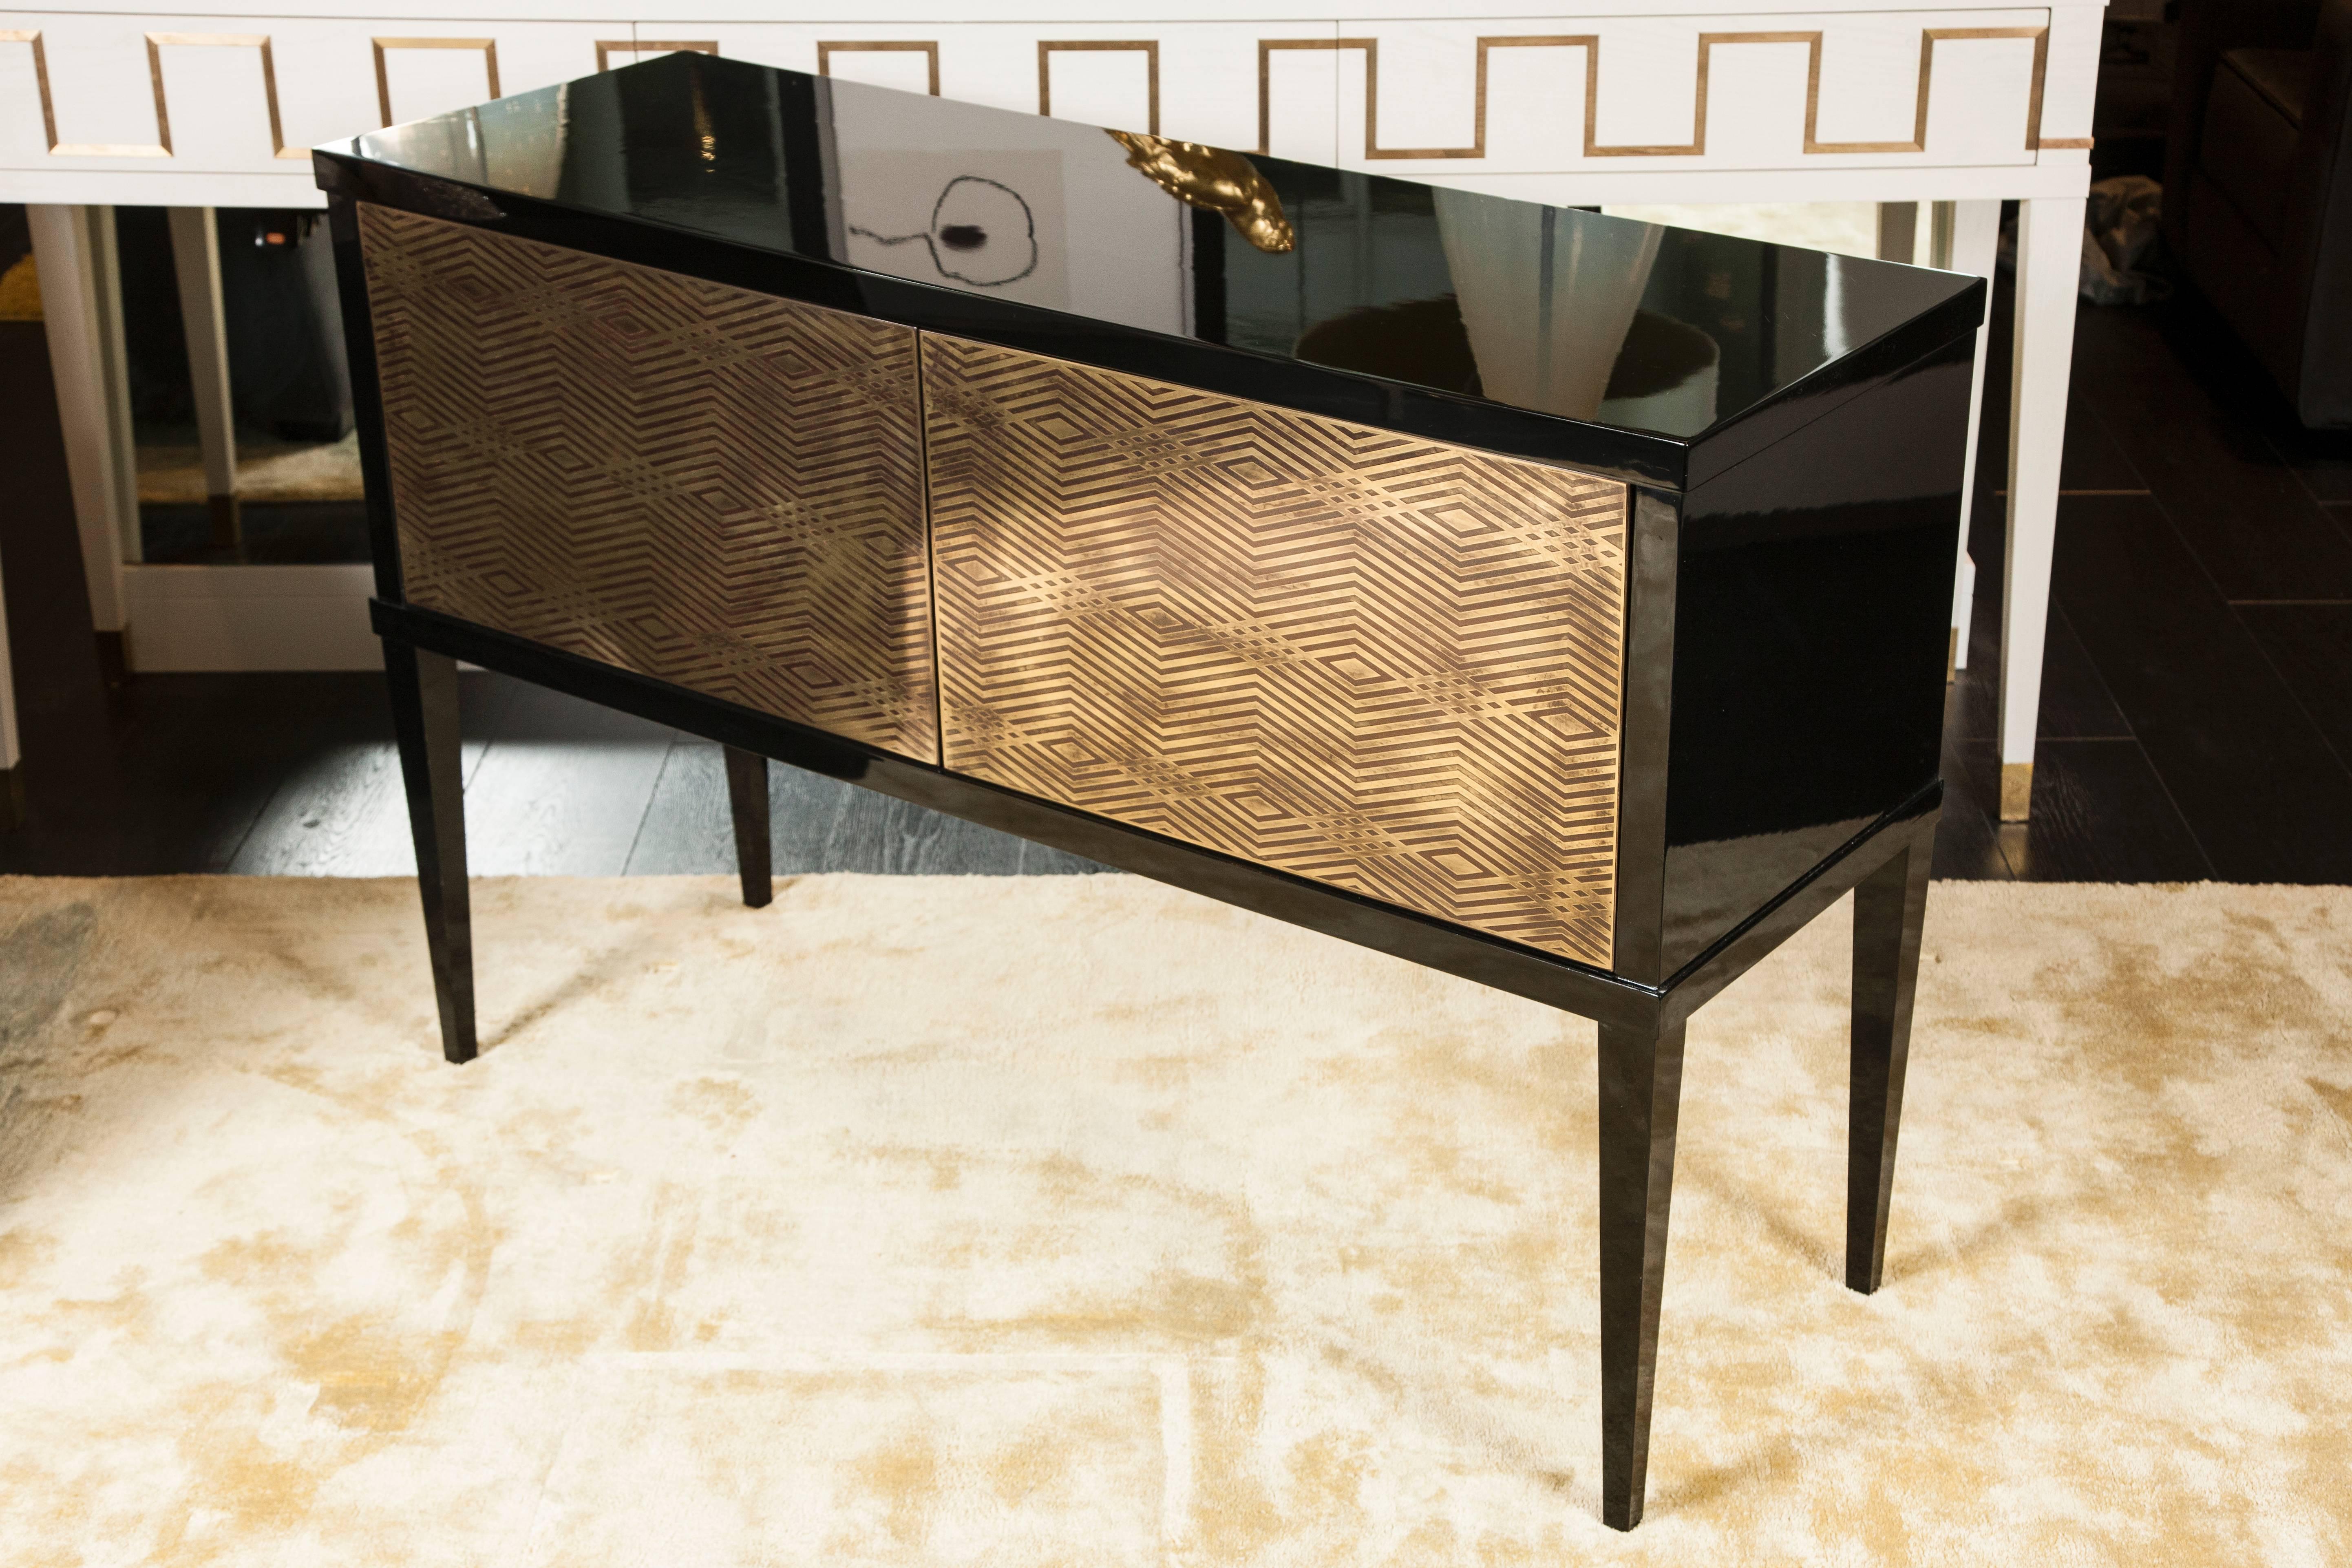 Piano lacquered cabinet with brass detailing.

Available in custom color lacquer.

As part of our signature collection, each piece is handmade in our workshop and is available in bespoke sizes. For further information please request a quotation.